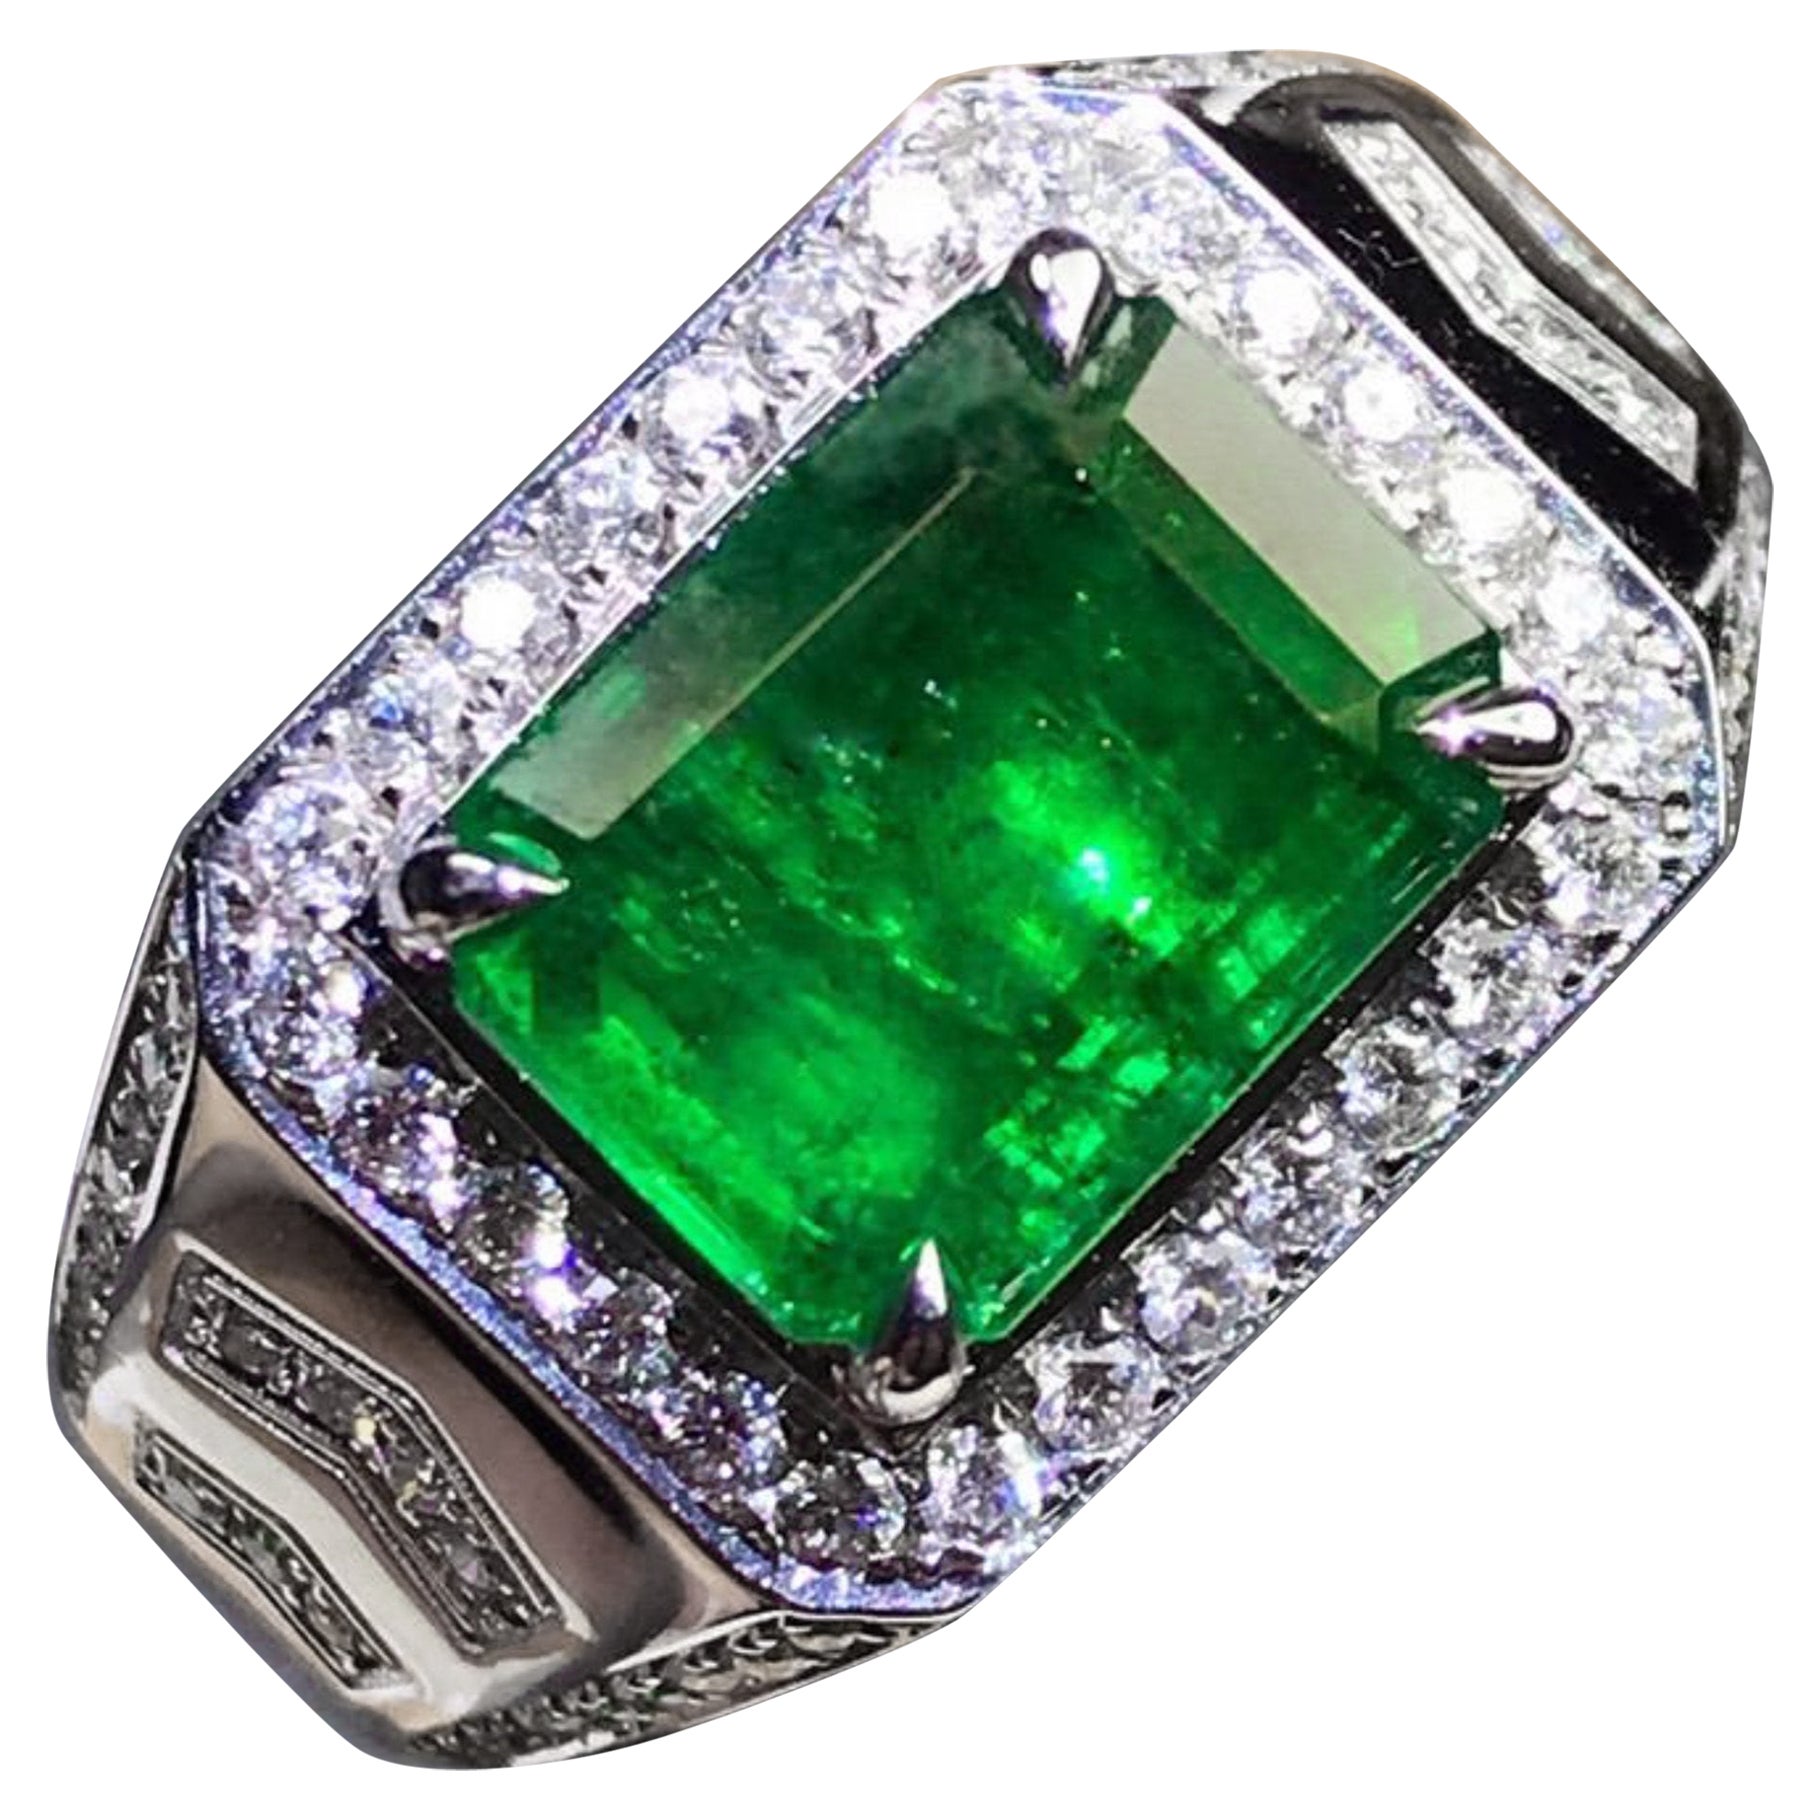 For Sale:  Certified 3 CT Natural Emerald Diamond Engagement Ring in 18K Gold For Men's